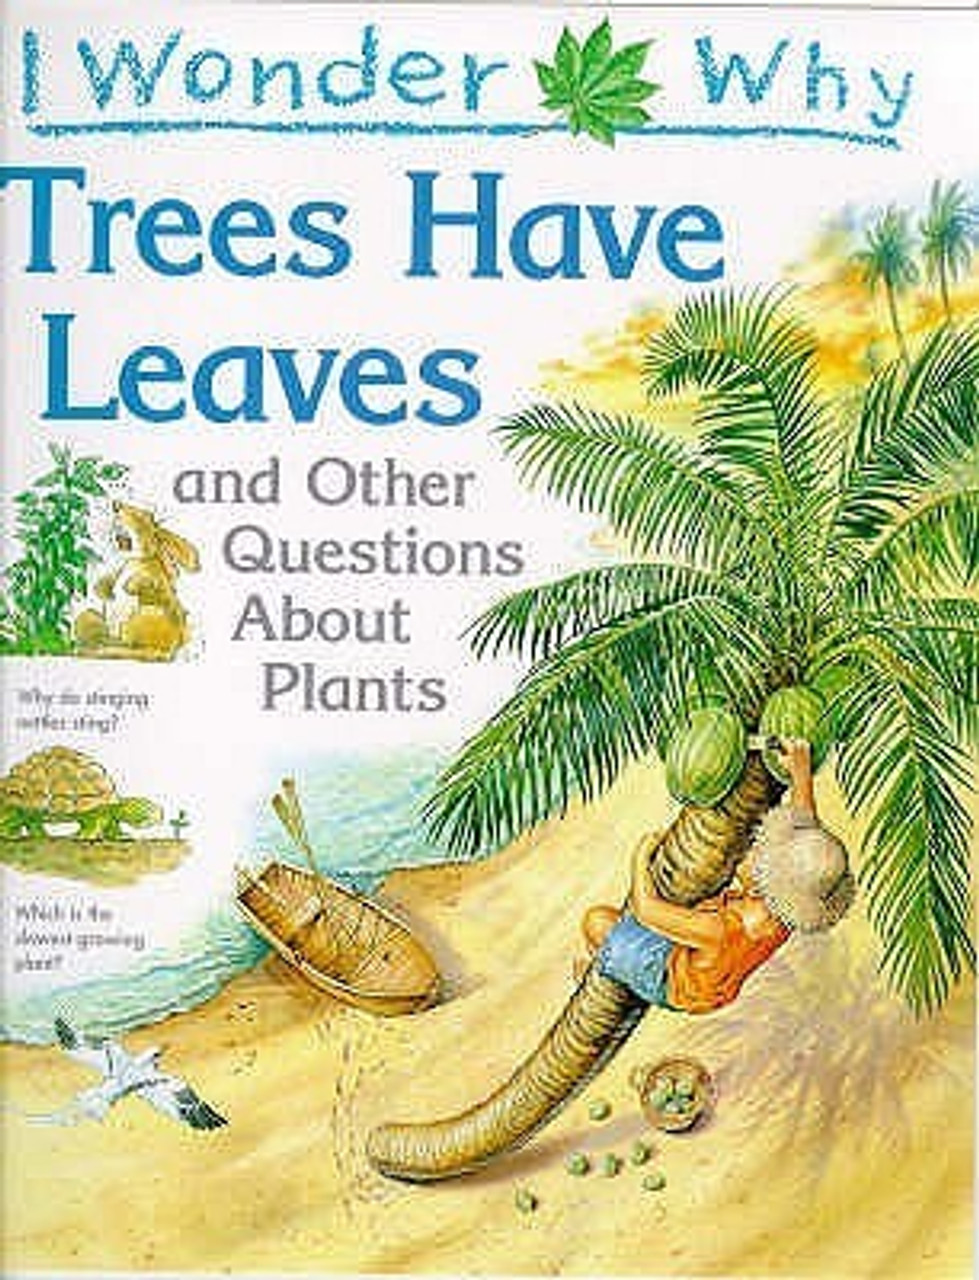 Andy Charman / I Wonder Why Trees Have Leaves and Other Questions About Plants (Children's Picture Book)